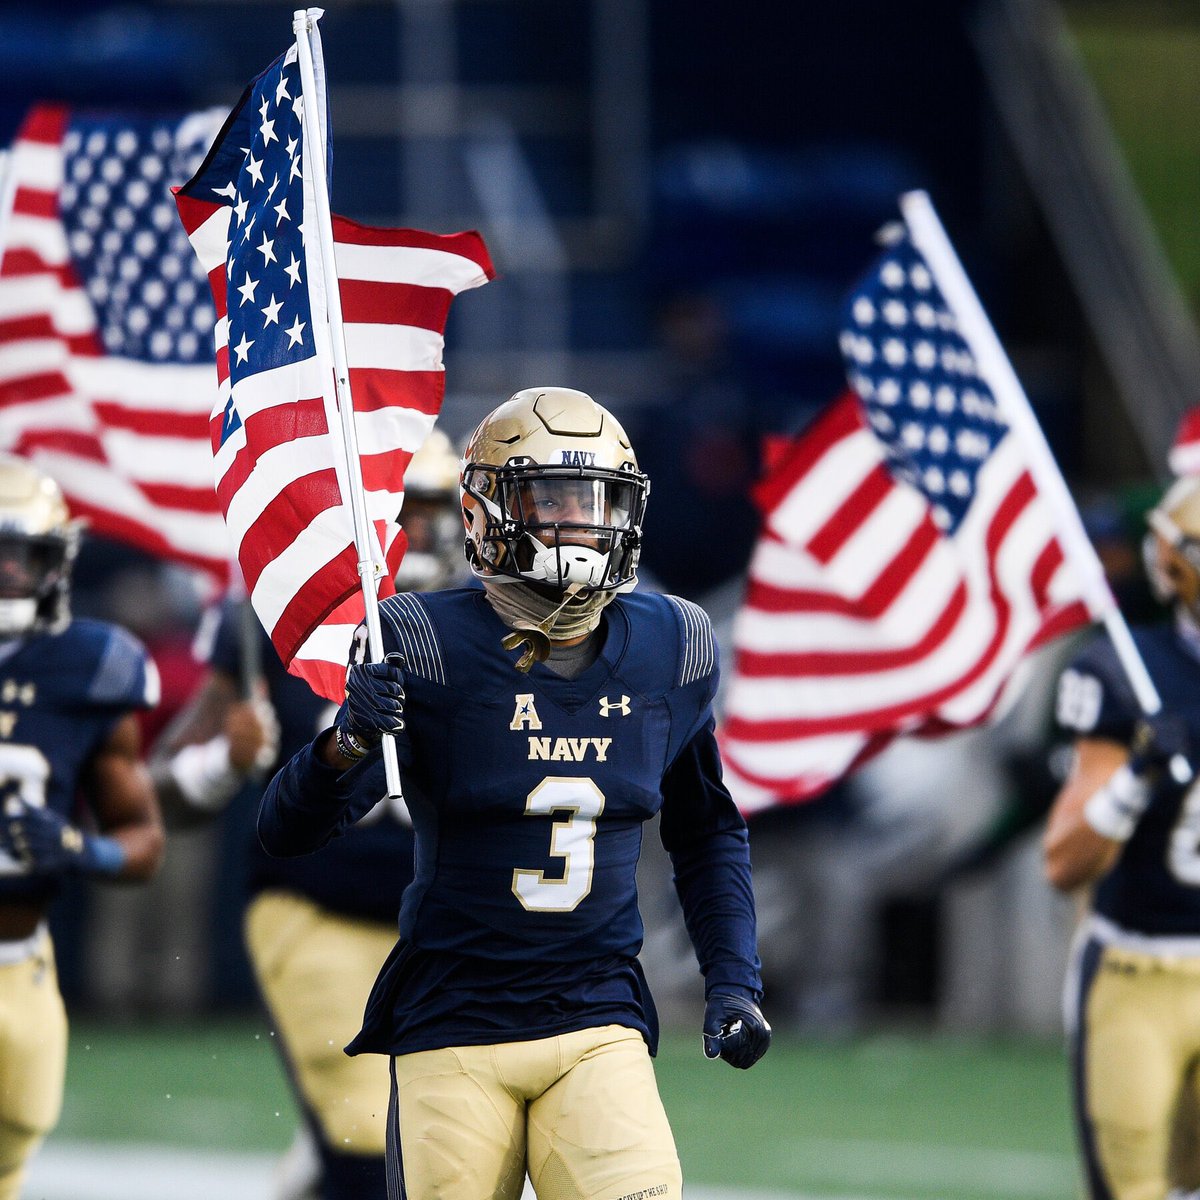 #AGTG Blessed to receive an offer from Navy !!! @NavyFB @CoachWimberly @Coach_FredM @lhsvikingsfbrec @CoachJ_Williams @CarterVikingsFB @CoachReese_LHS @ChadSimmons_ @JeremyO_Johnson @RustyMansell_